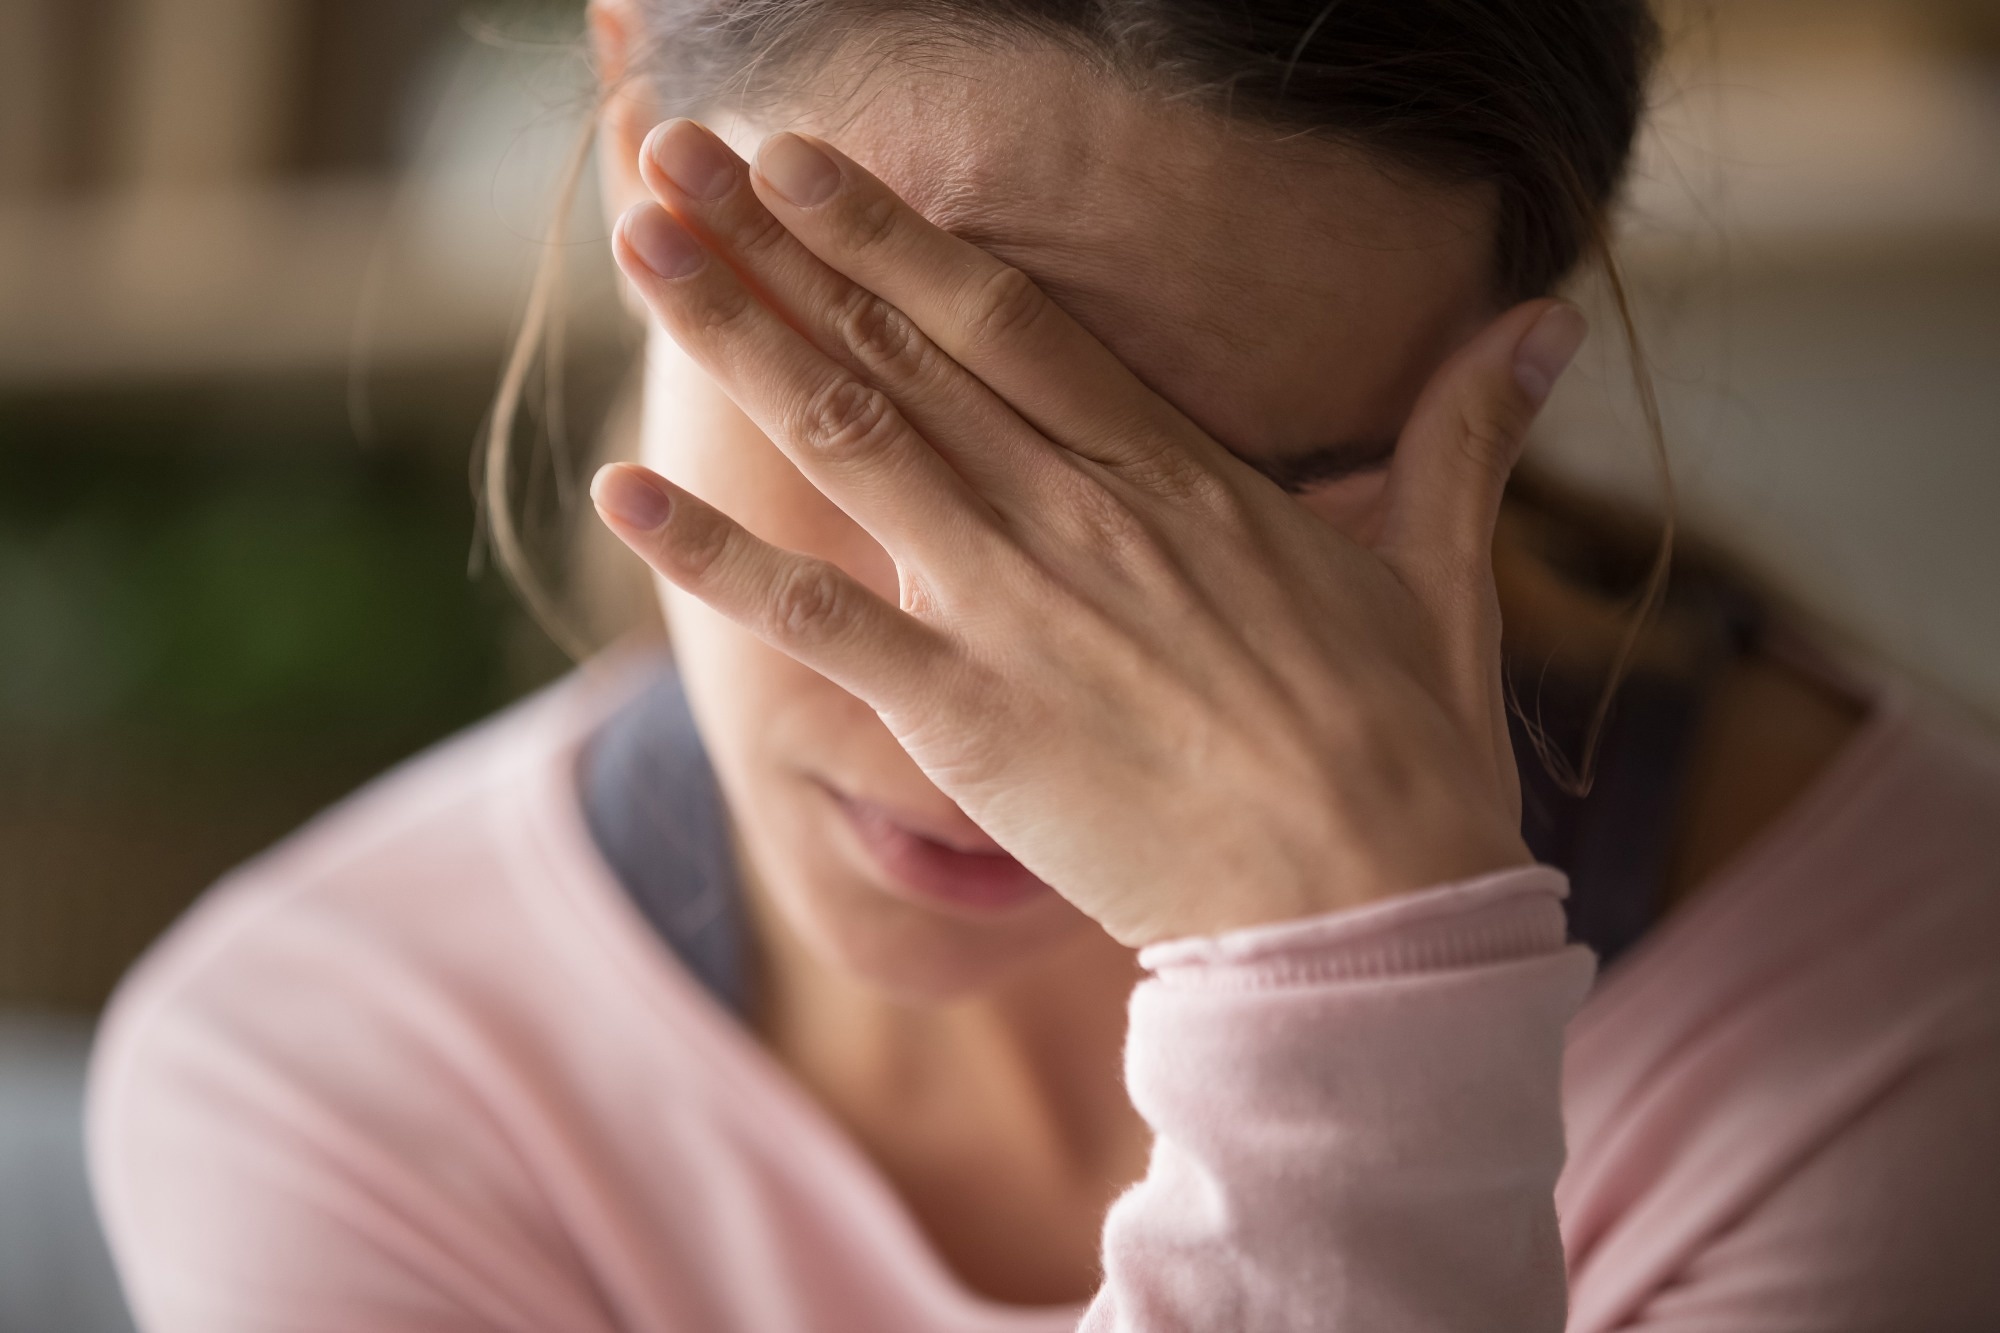 Study: Classification of odors associated with migraine attacks: a cross-sectional study. Image Credit: fizkes/Shutterstock.com